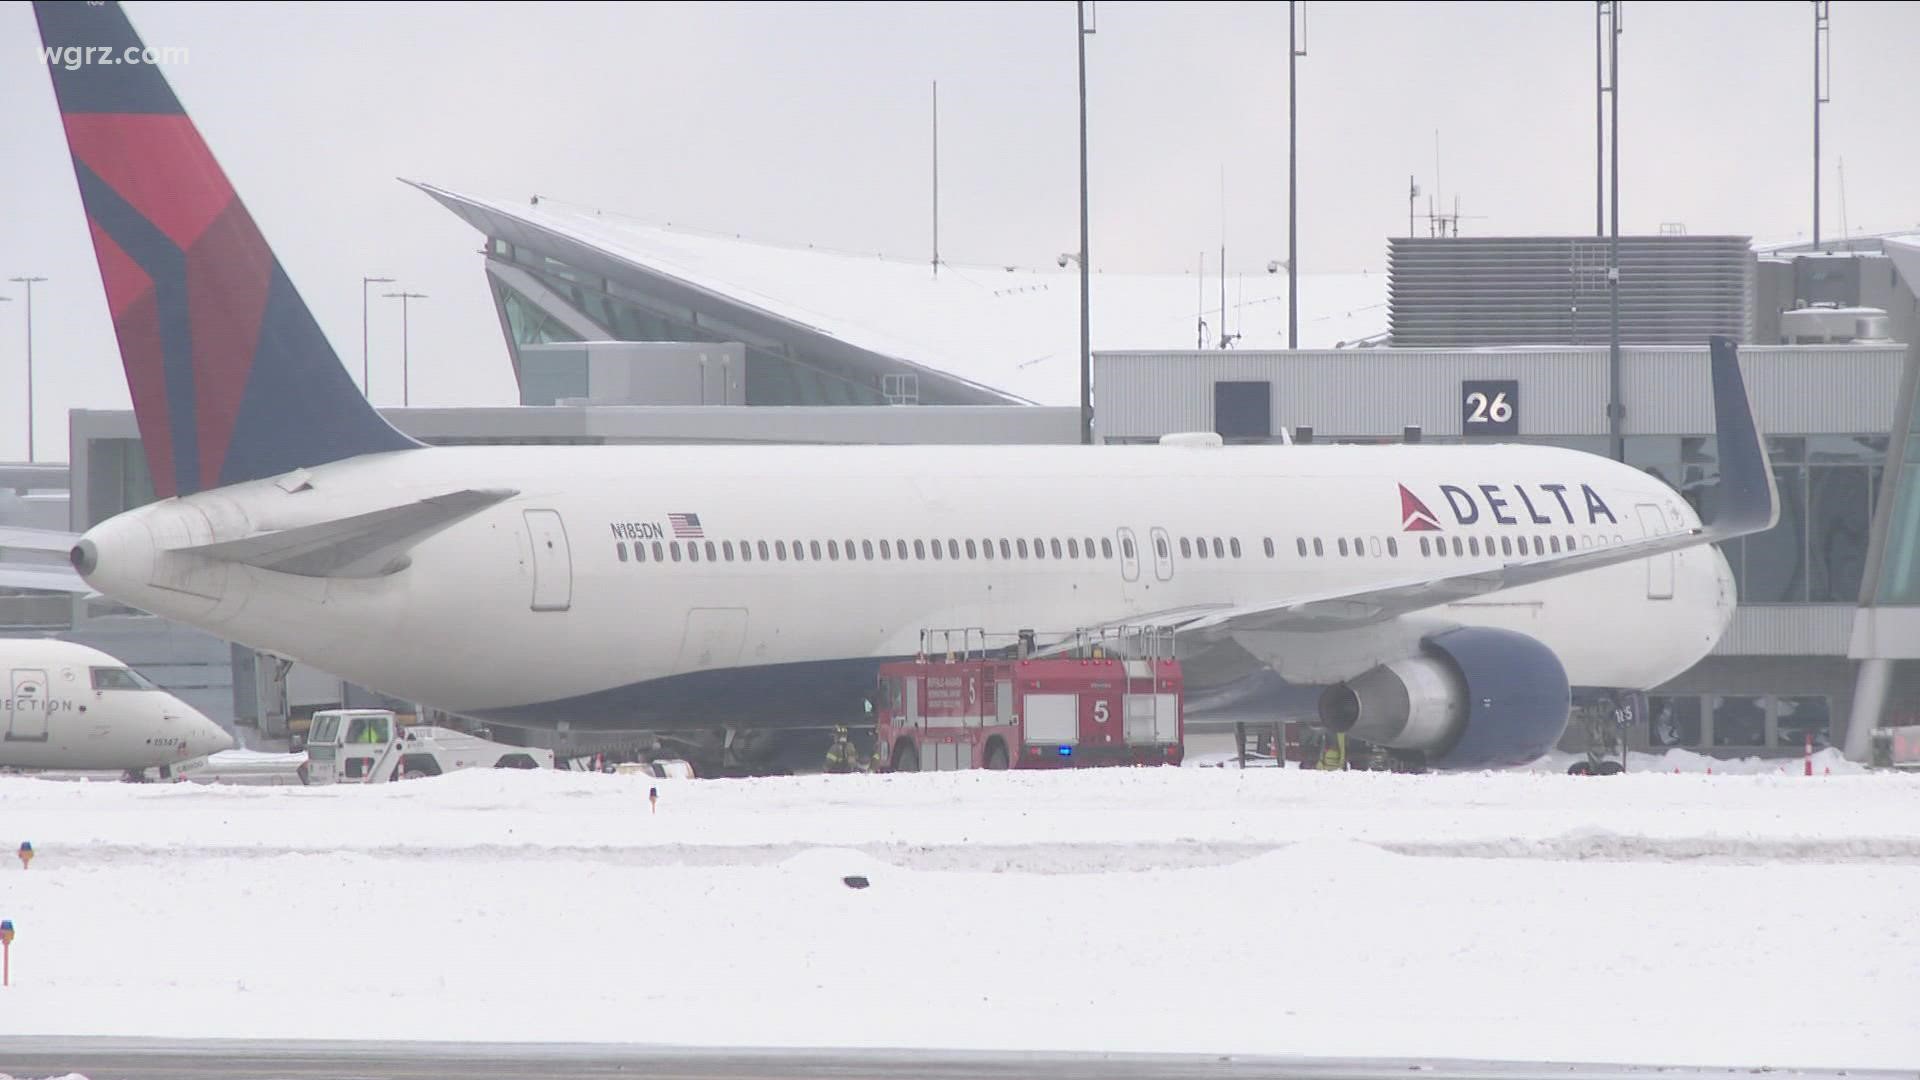 A Delta flight from New York to Los Angeles has landed safely here in Buffalo after being diverted because pilots smelled smoke in the cockpit.